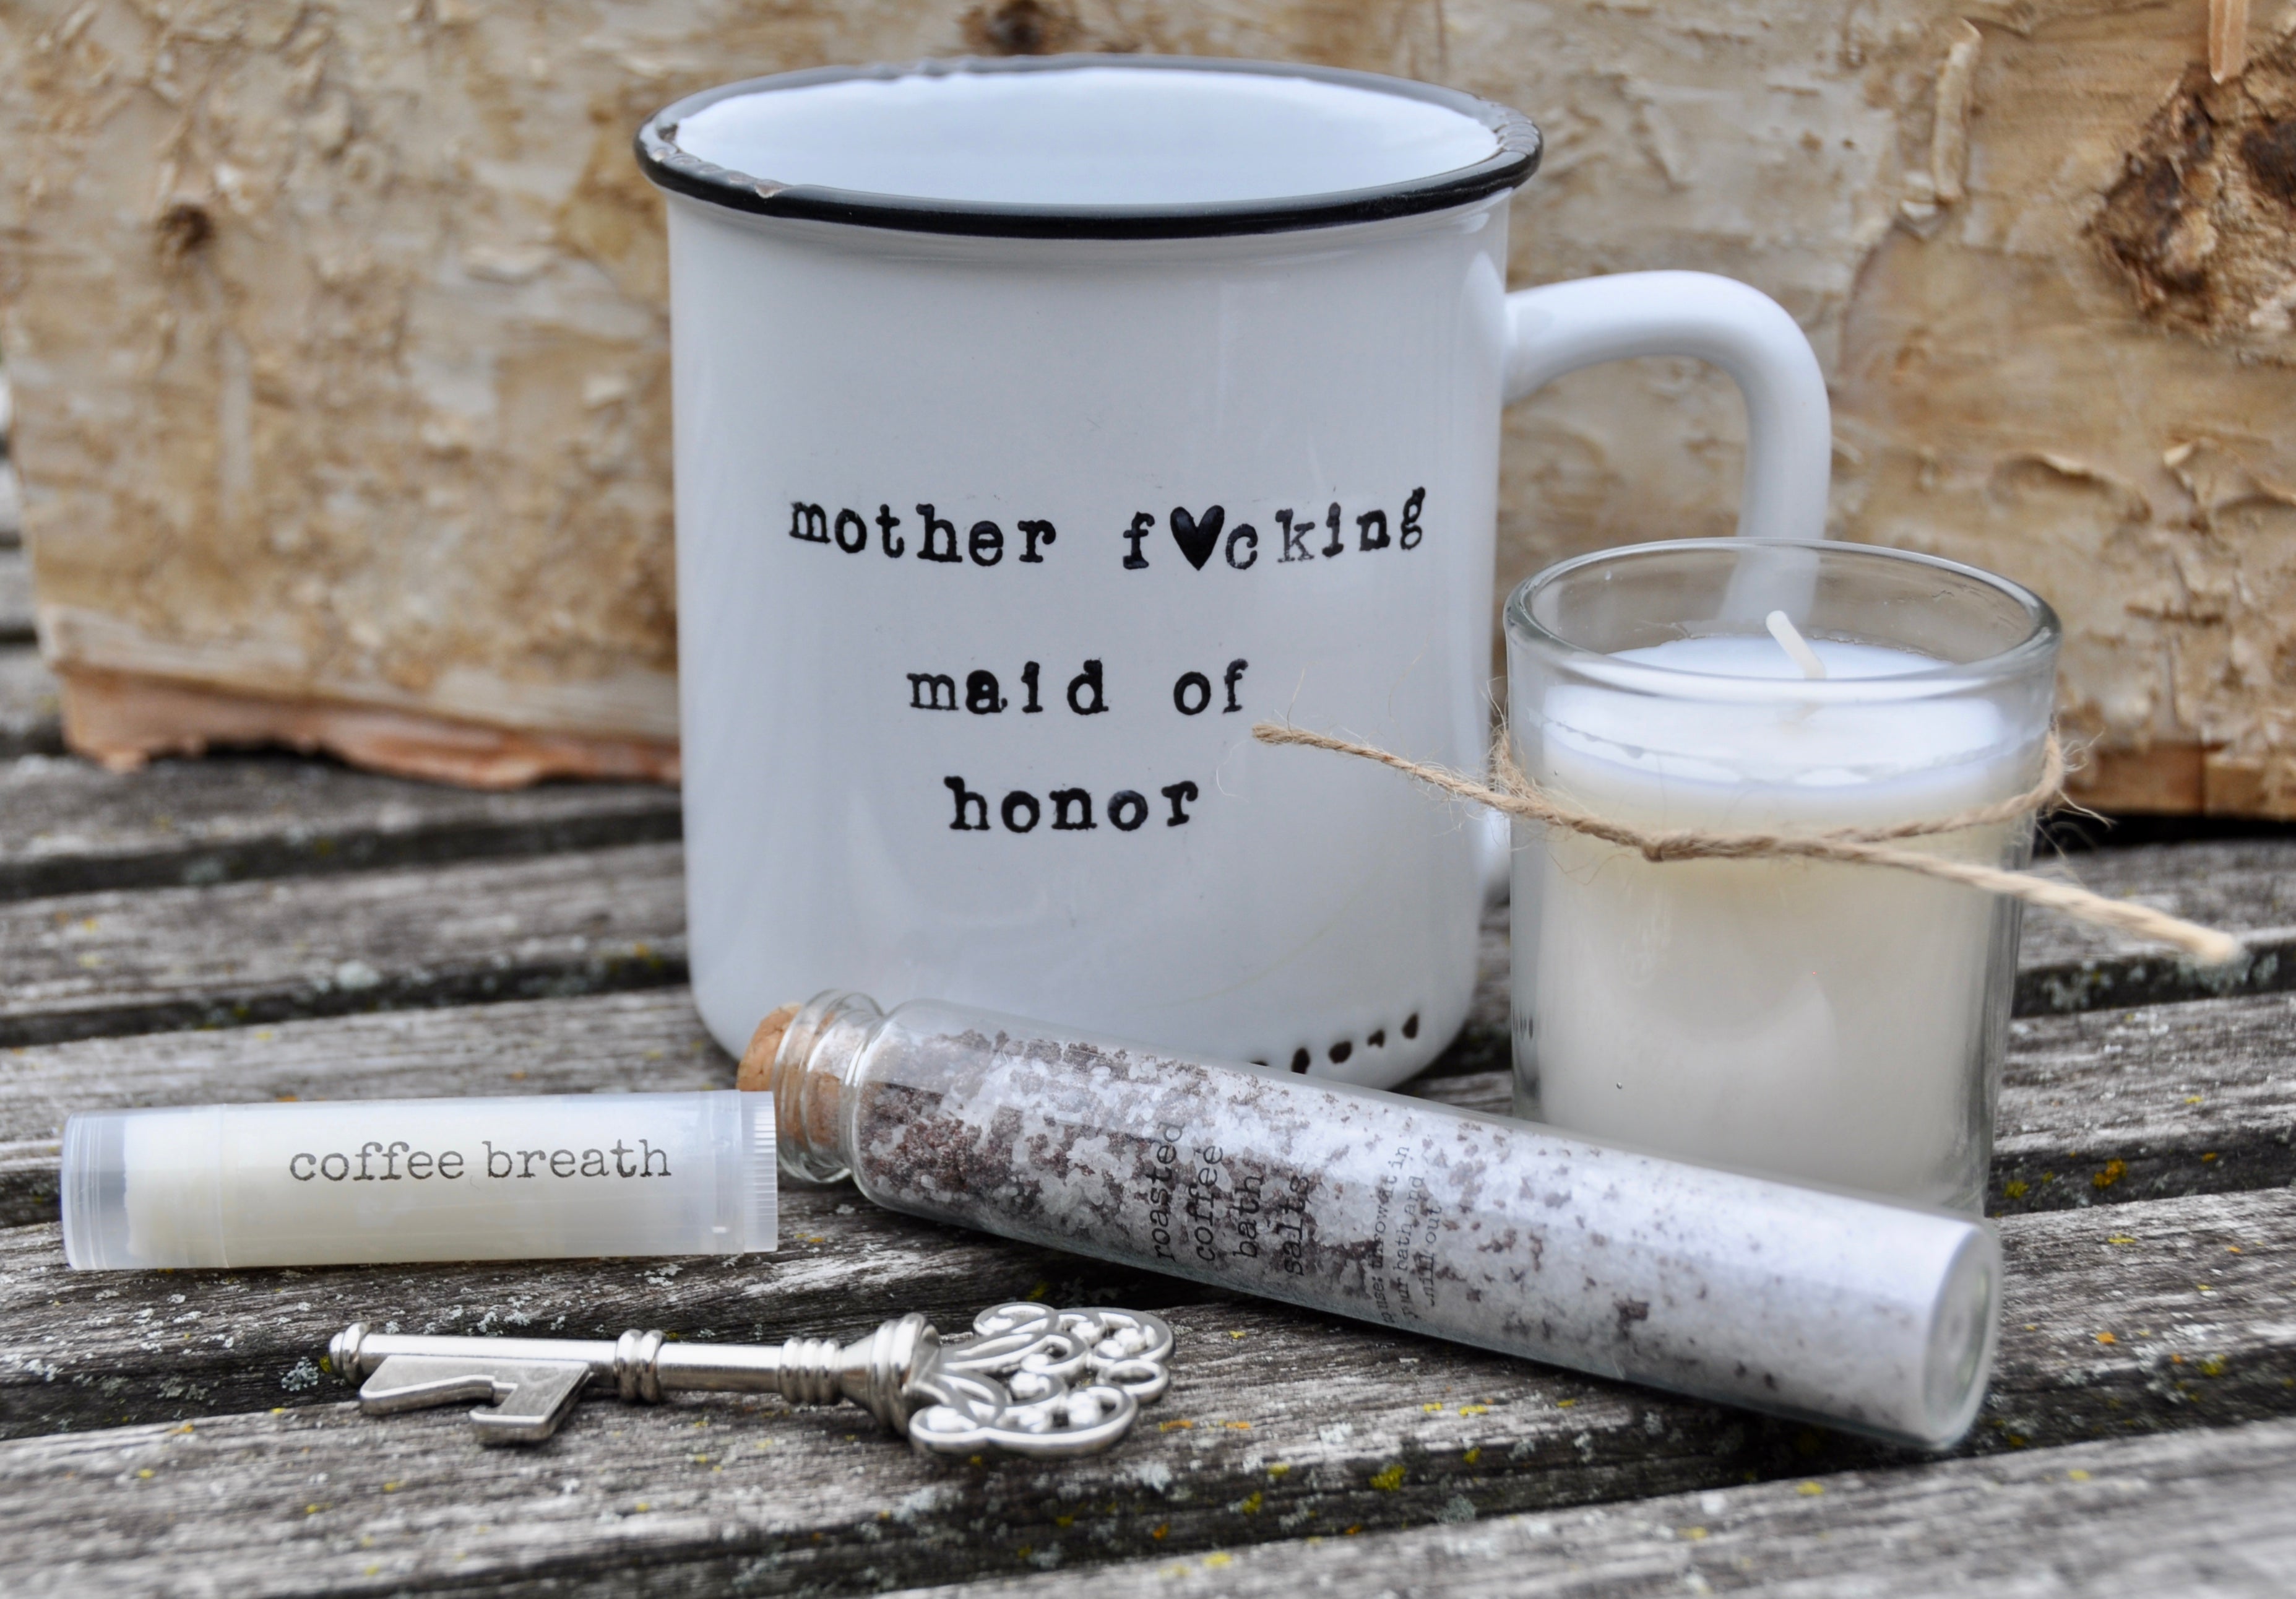 Maid of honor thank you gift box - Coffee lovers